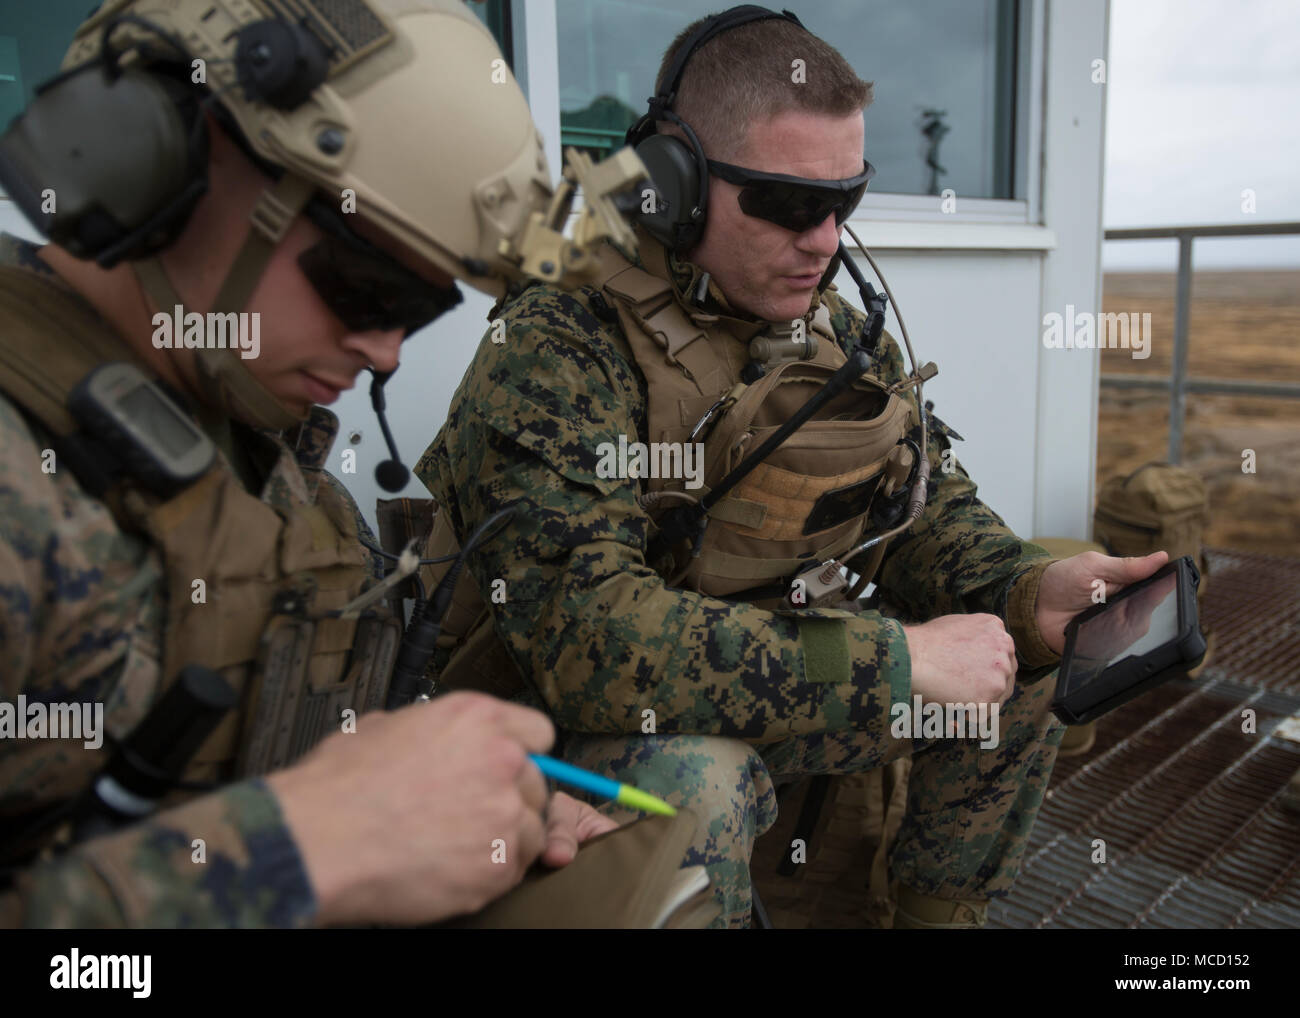 Major Michael Sedrick and Captain Michael Valdez, Marines with 2nd Air Naval Gunfire Liaison Company, discuss possible plans for a simulated scenario during close air-support drills at an aircraft attack range on Piney Island, North Carolina, Feb. 7, 2018. The Marines practiced making flight and attack plans for the pilots depending on specific situations. (U.S. Marine Corps photo by Lance Cpl. Ashley McLaughlin) Stock Photo